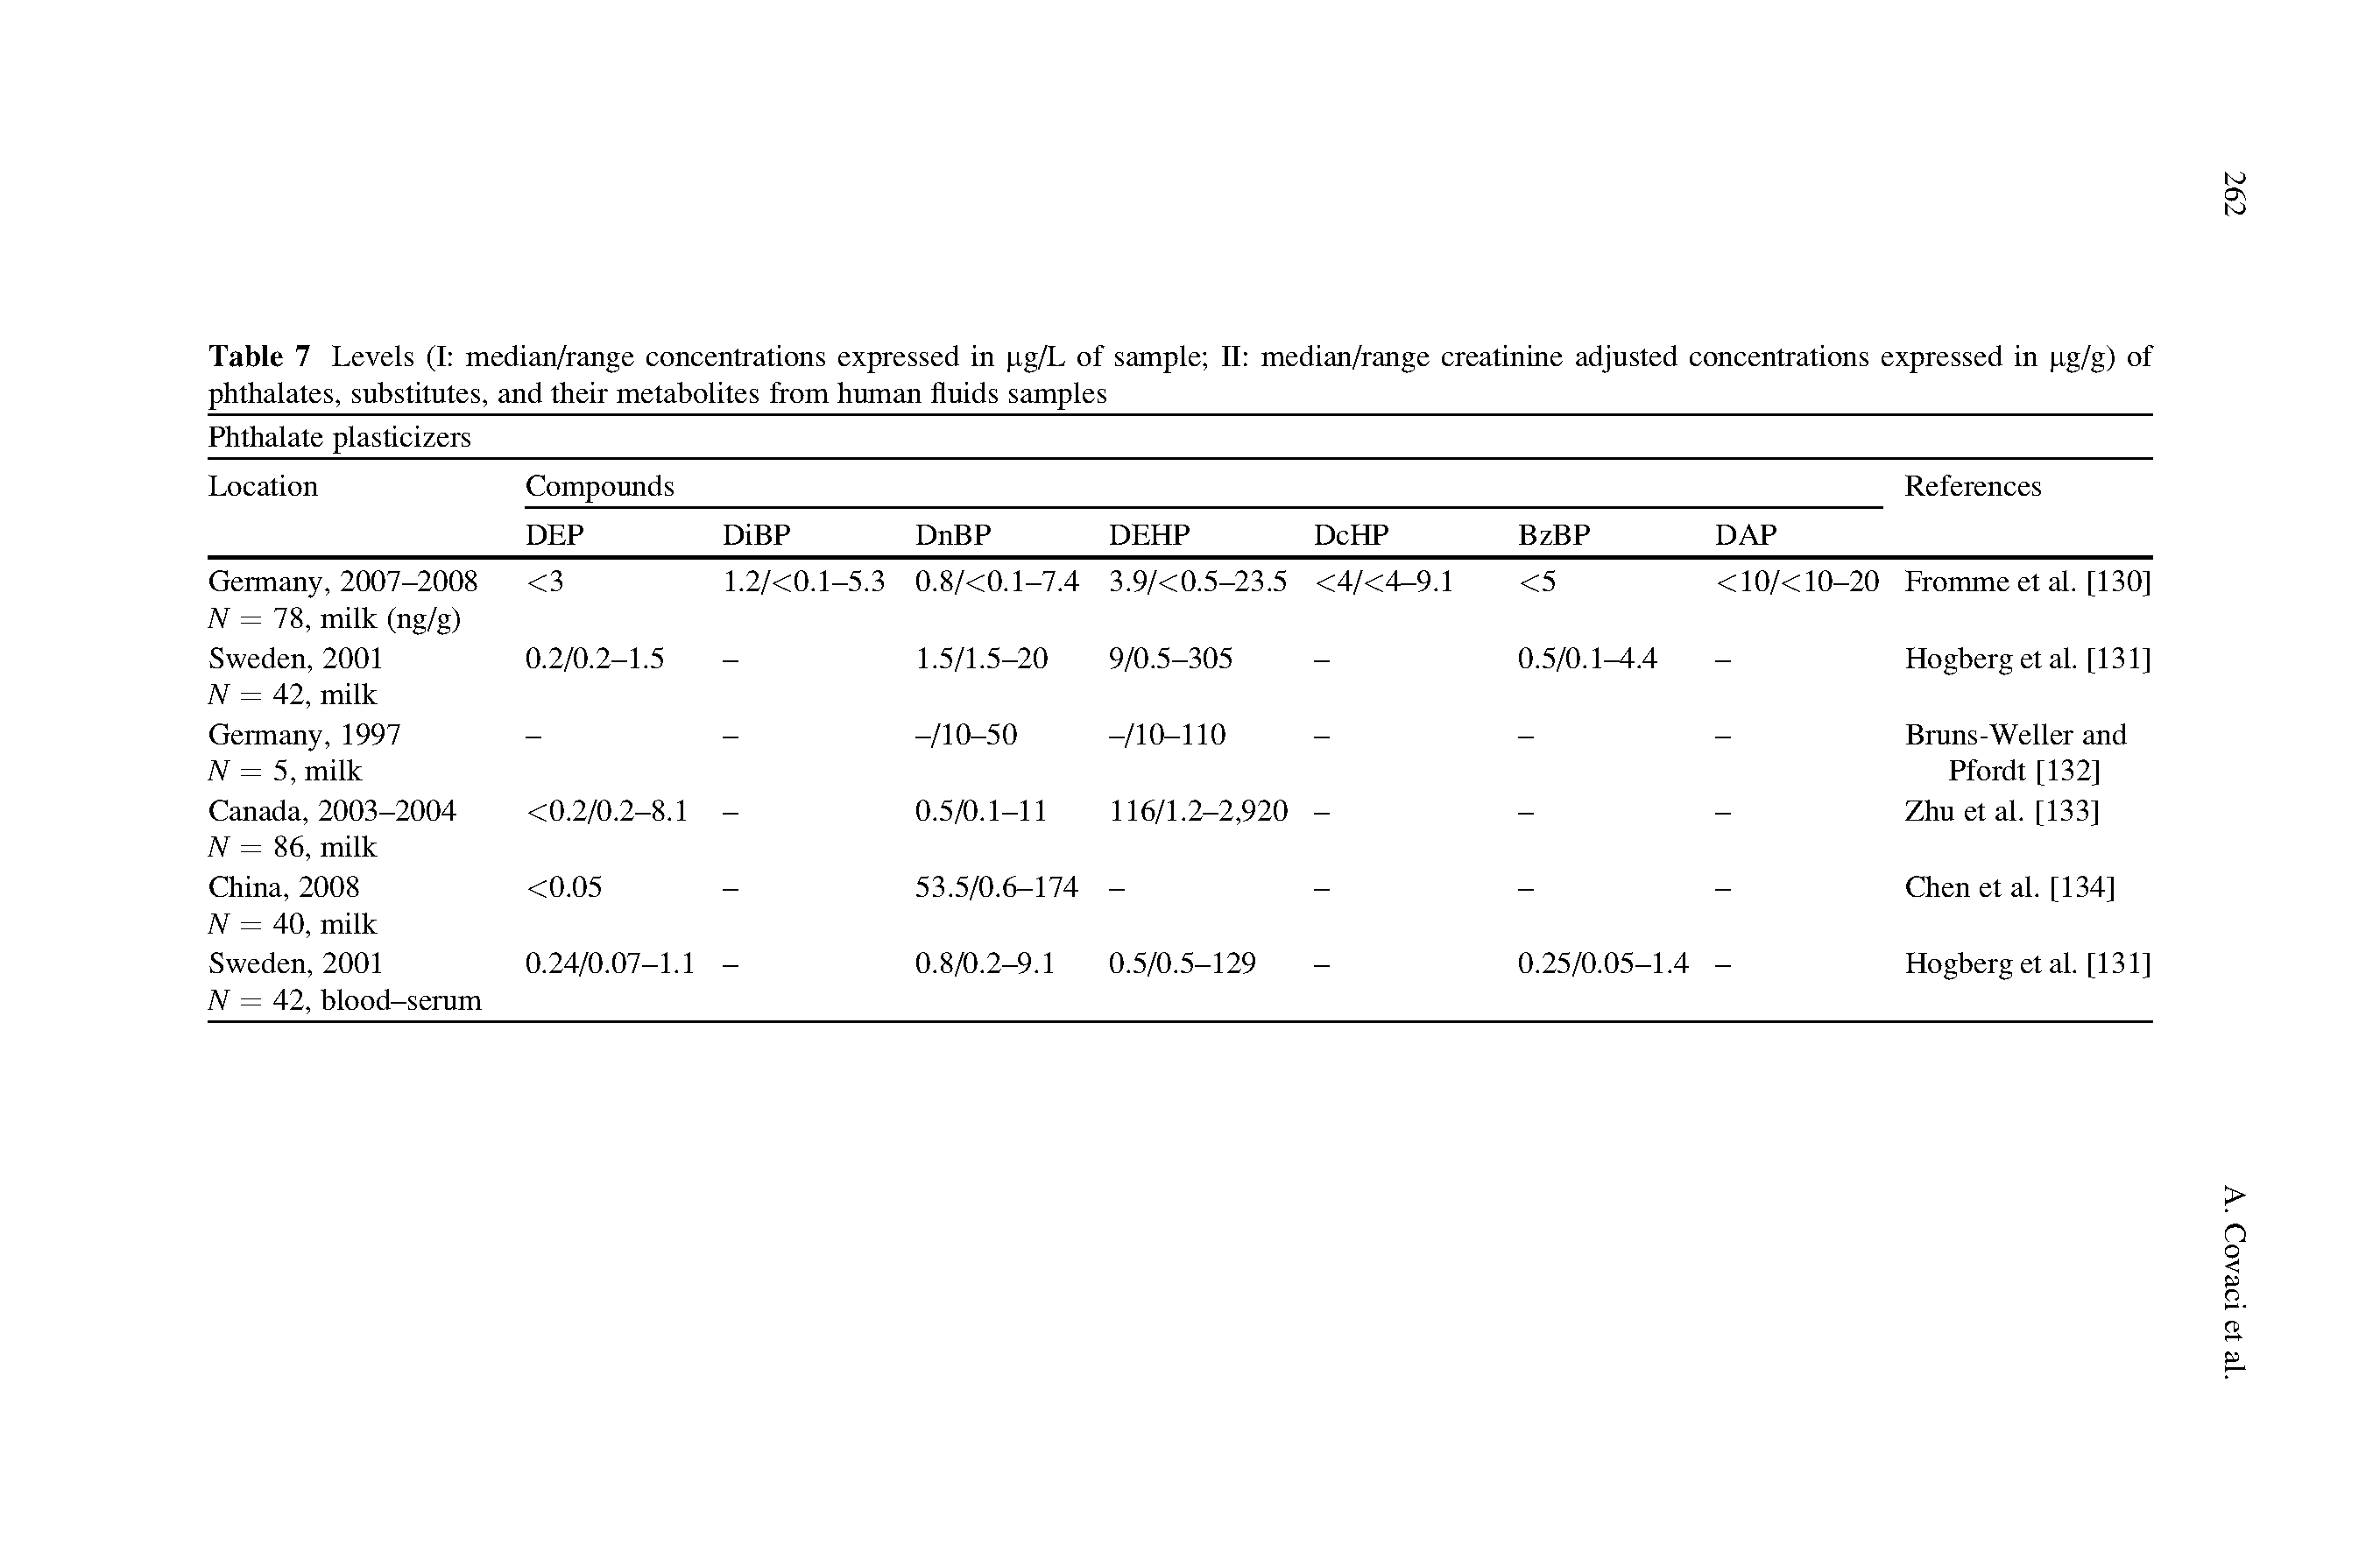 Table 7 Levels (I median/range concentrations expressed in pg/L of sample II median/range creatinine adjusted concentrations expressed in pg/g) of phthalates, substitutes, and their metabolites from human fluids samples...